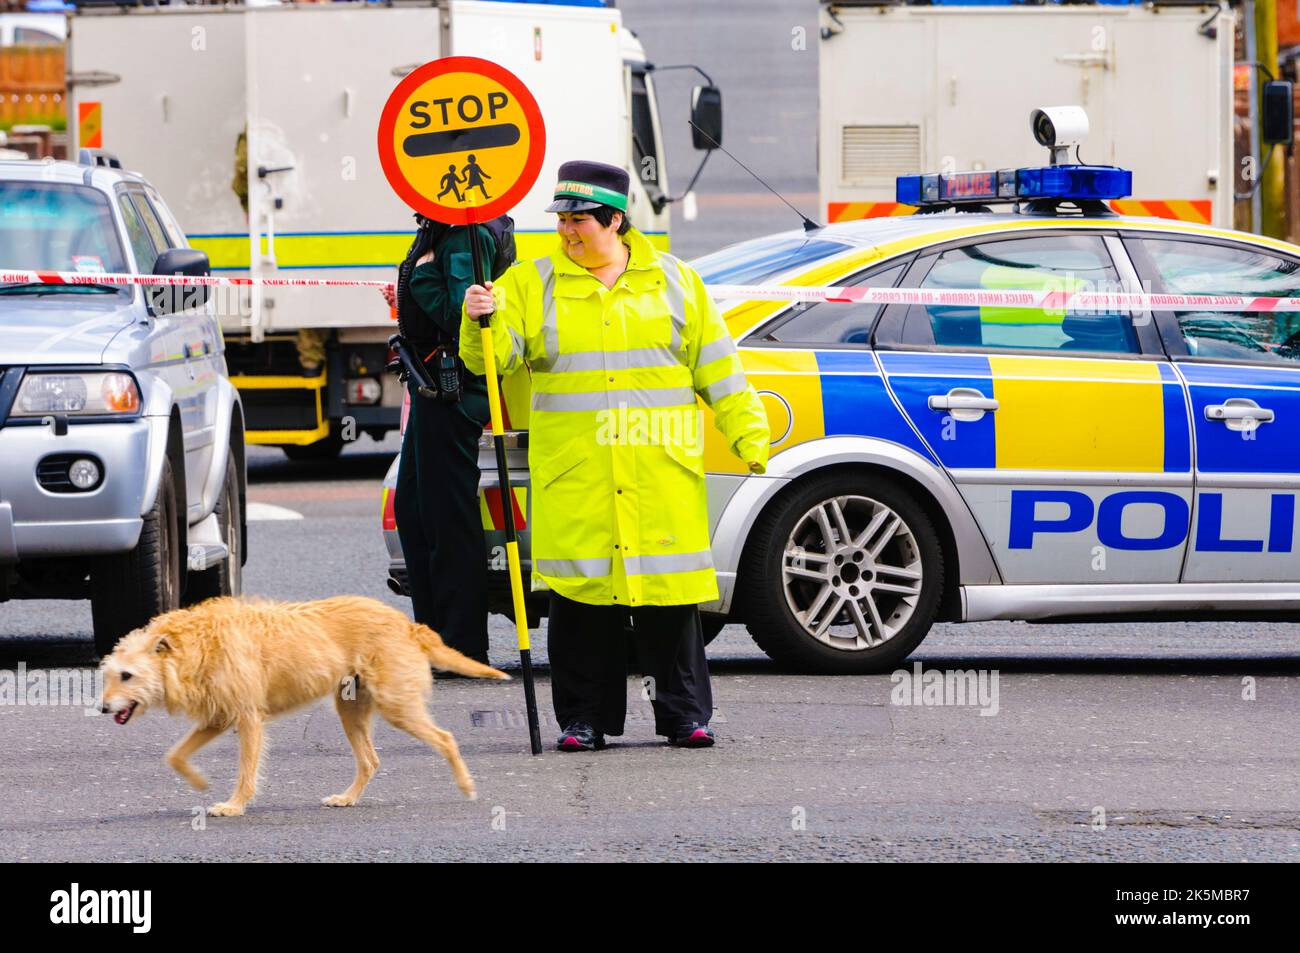 Belfast, UK. 05/04/2012 - A dog crosses the road at a manned pedesterian crossing during a security alert in Ardoyne. The object was later declared a hoax. Stock Photo